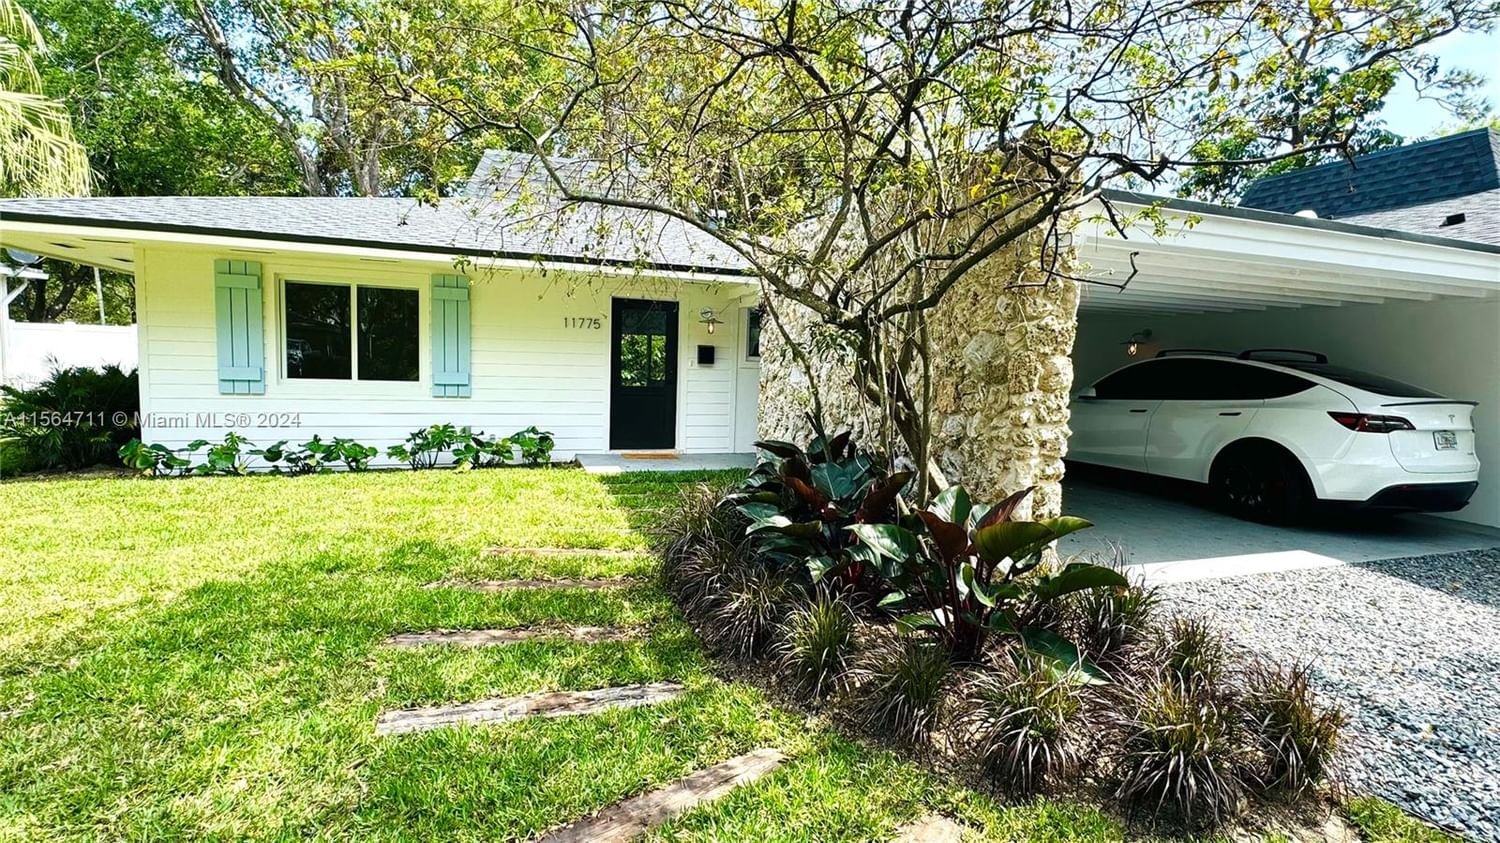 Real estate property located at 11775 81 Rd, Miami-Dade County, SUNILAND TERRACE, Pinecrest, FL